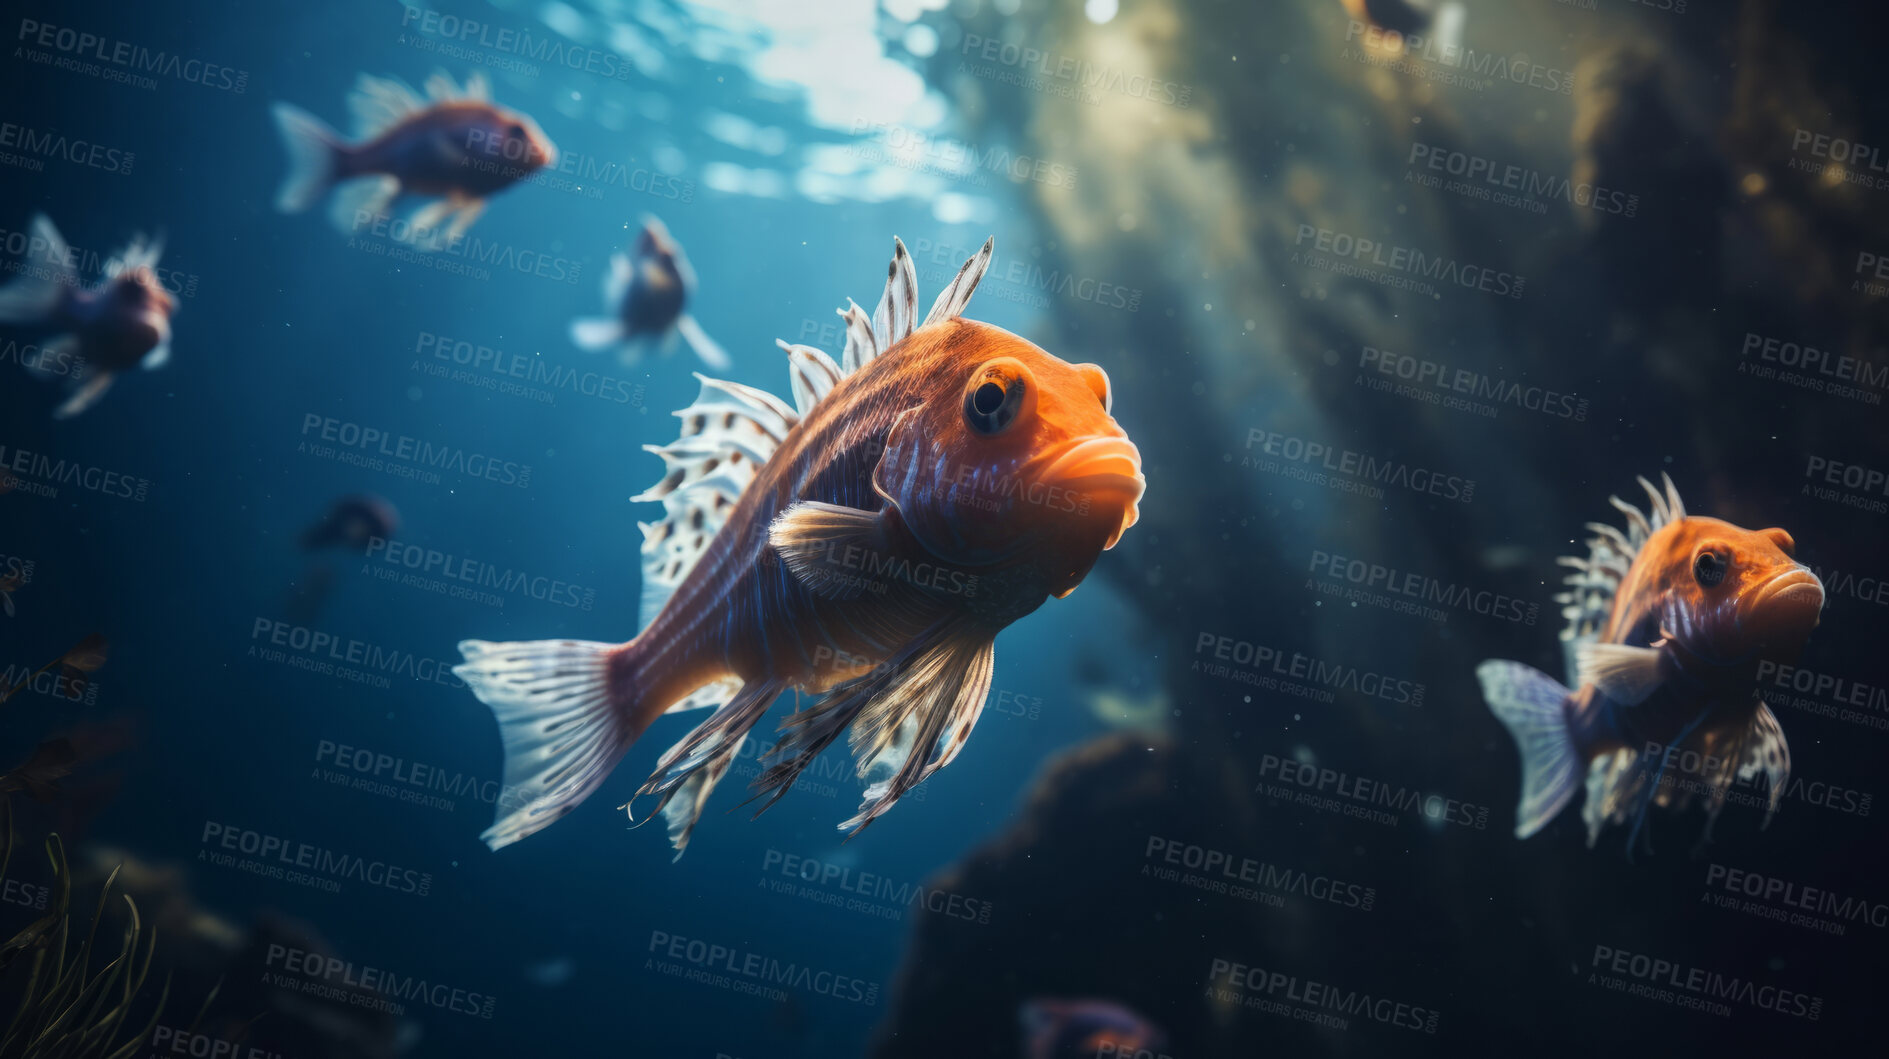 Buy stock photo Underwater close-up of a fish. Fish in background. Underwater scenery.